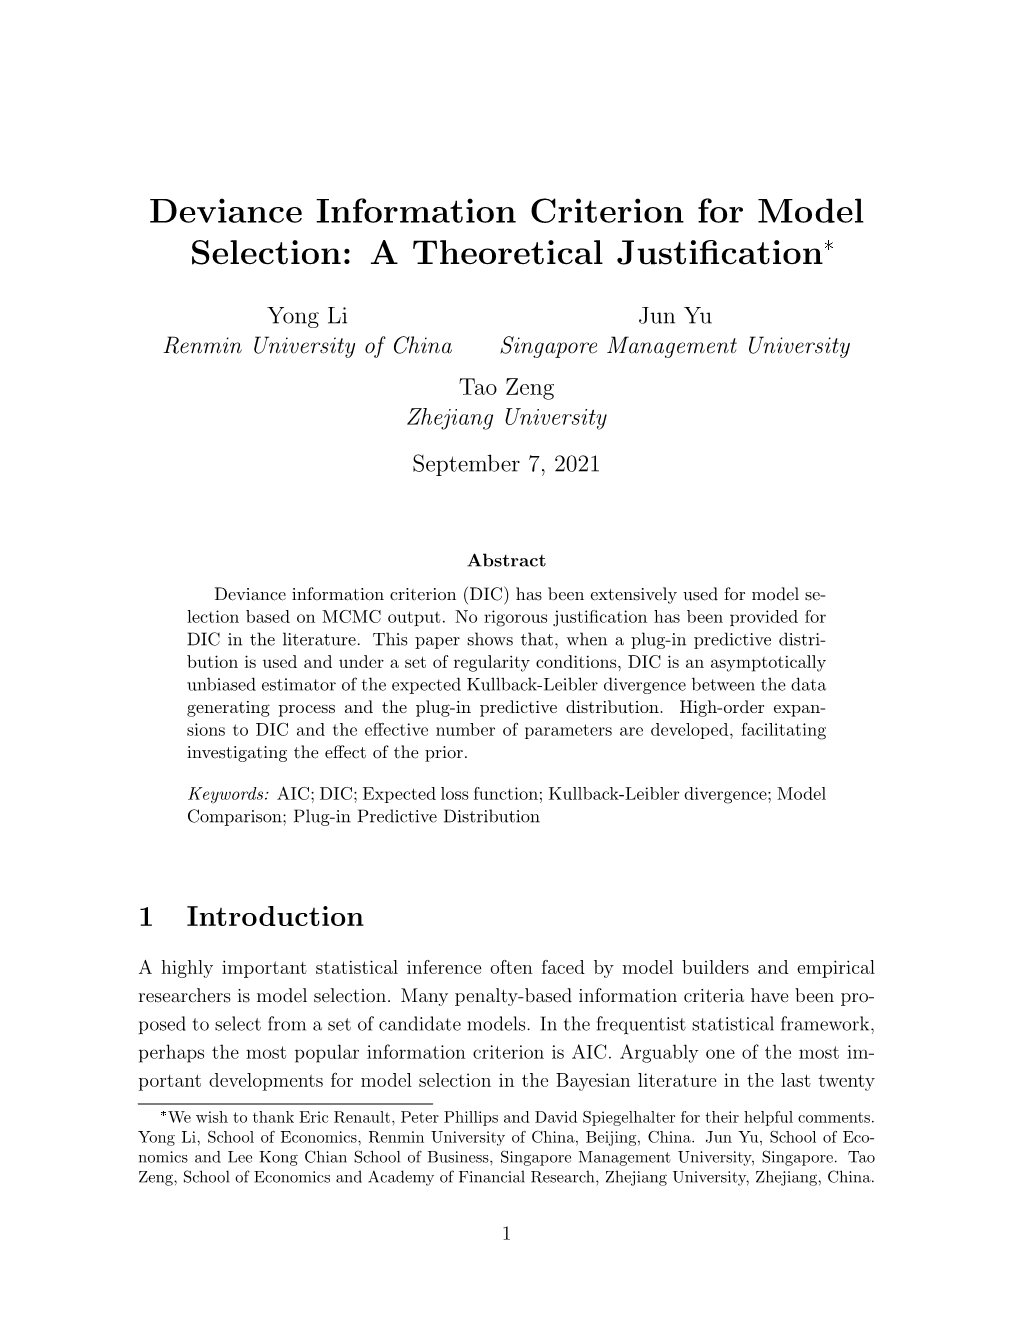 Deviance Information Criterion for Model Selection: Justification and Variation